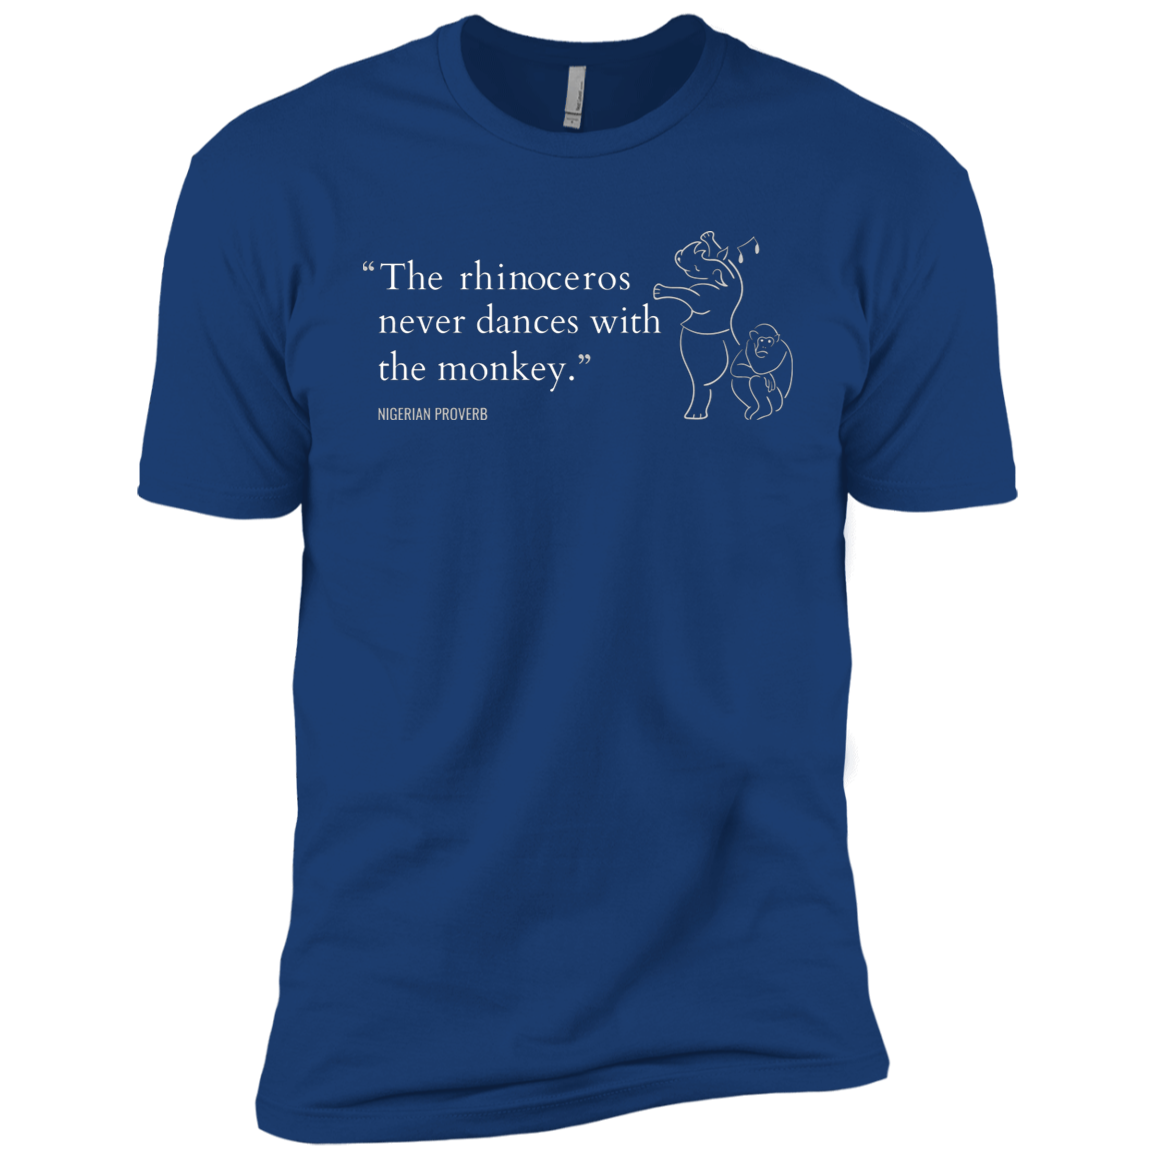 The Rhinoceros Never Dances With the Monkey Kids' Classic T-Shirt